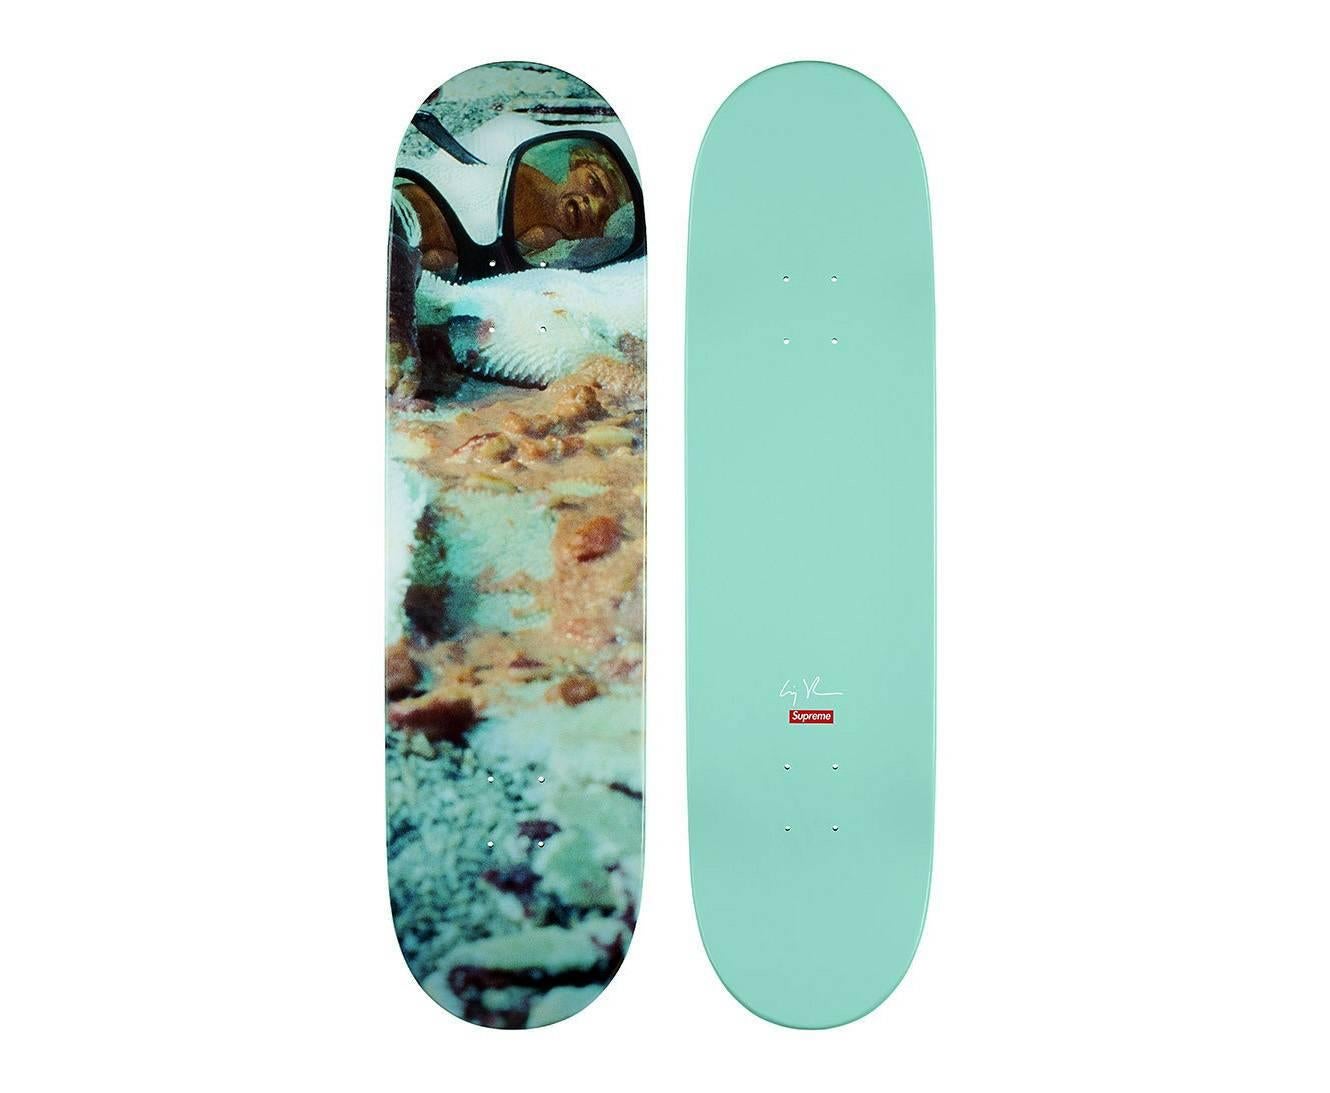 Cindy Sherman Supreme Skateboard decks:
Born out of the collaboration between Cindy Sherman and Supreme in 2017, this set of 2 skateboard decks, features imagery from Sherman's much heralded Grotesque Series. Sherman’s printed signature can also be